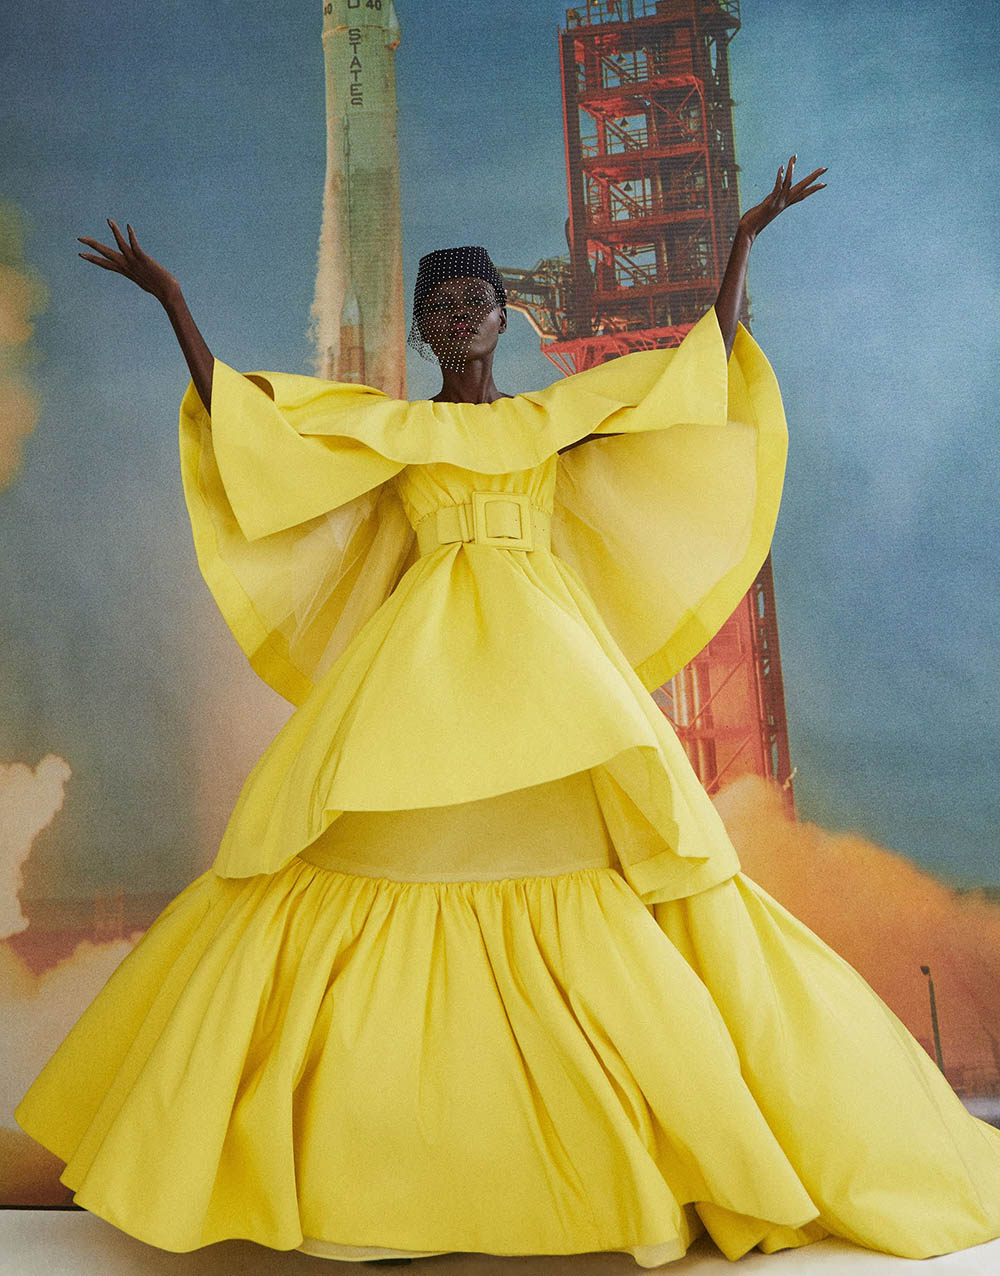 Grace Bol by Quentin Jones for Marie Claire US Fall 2020